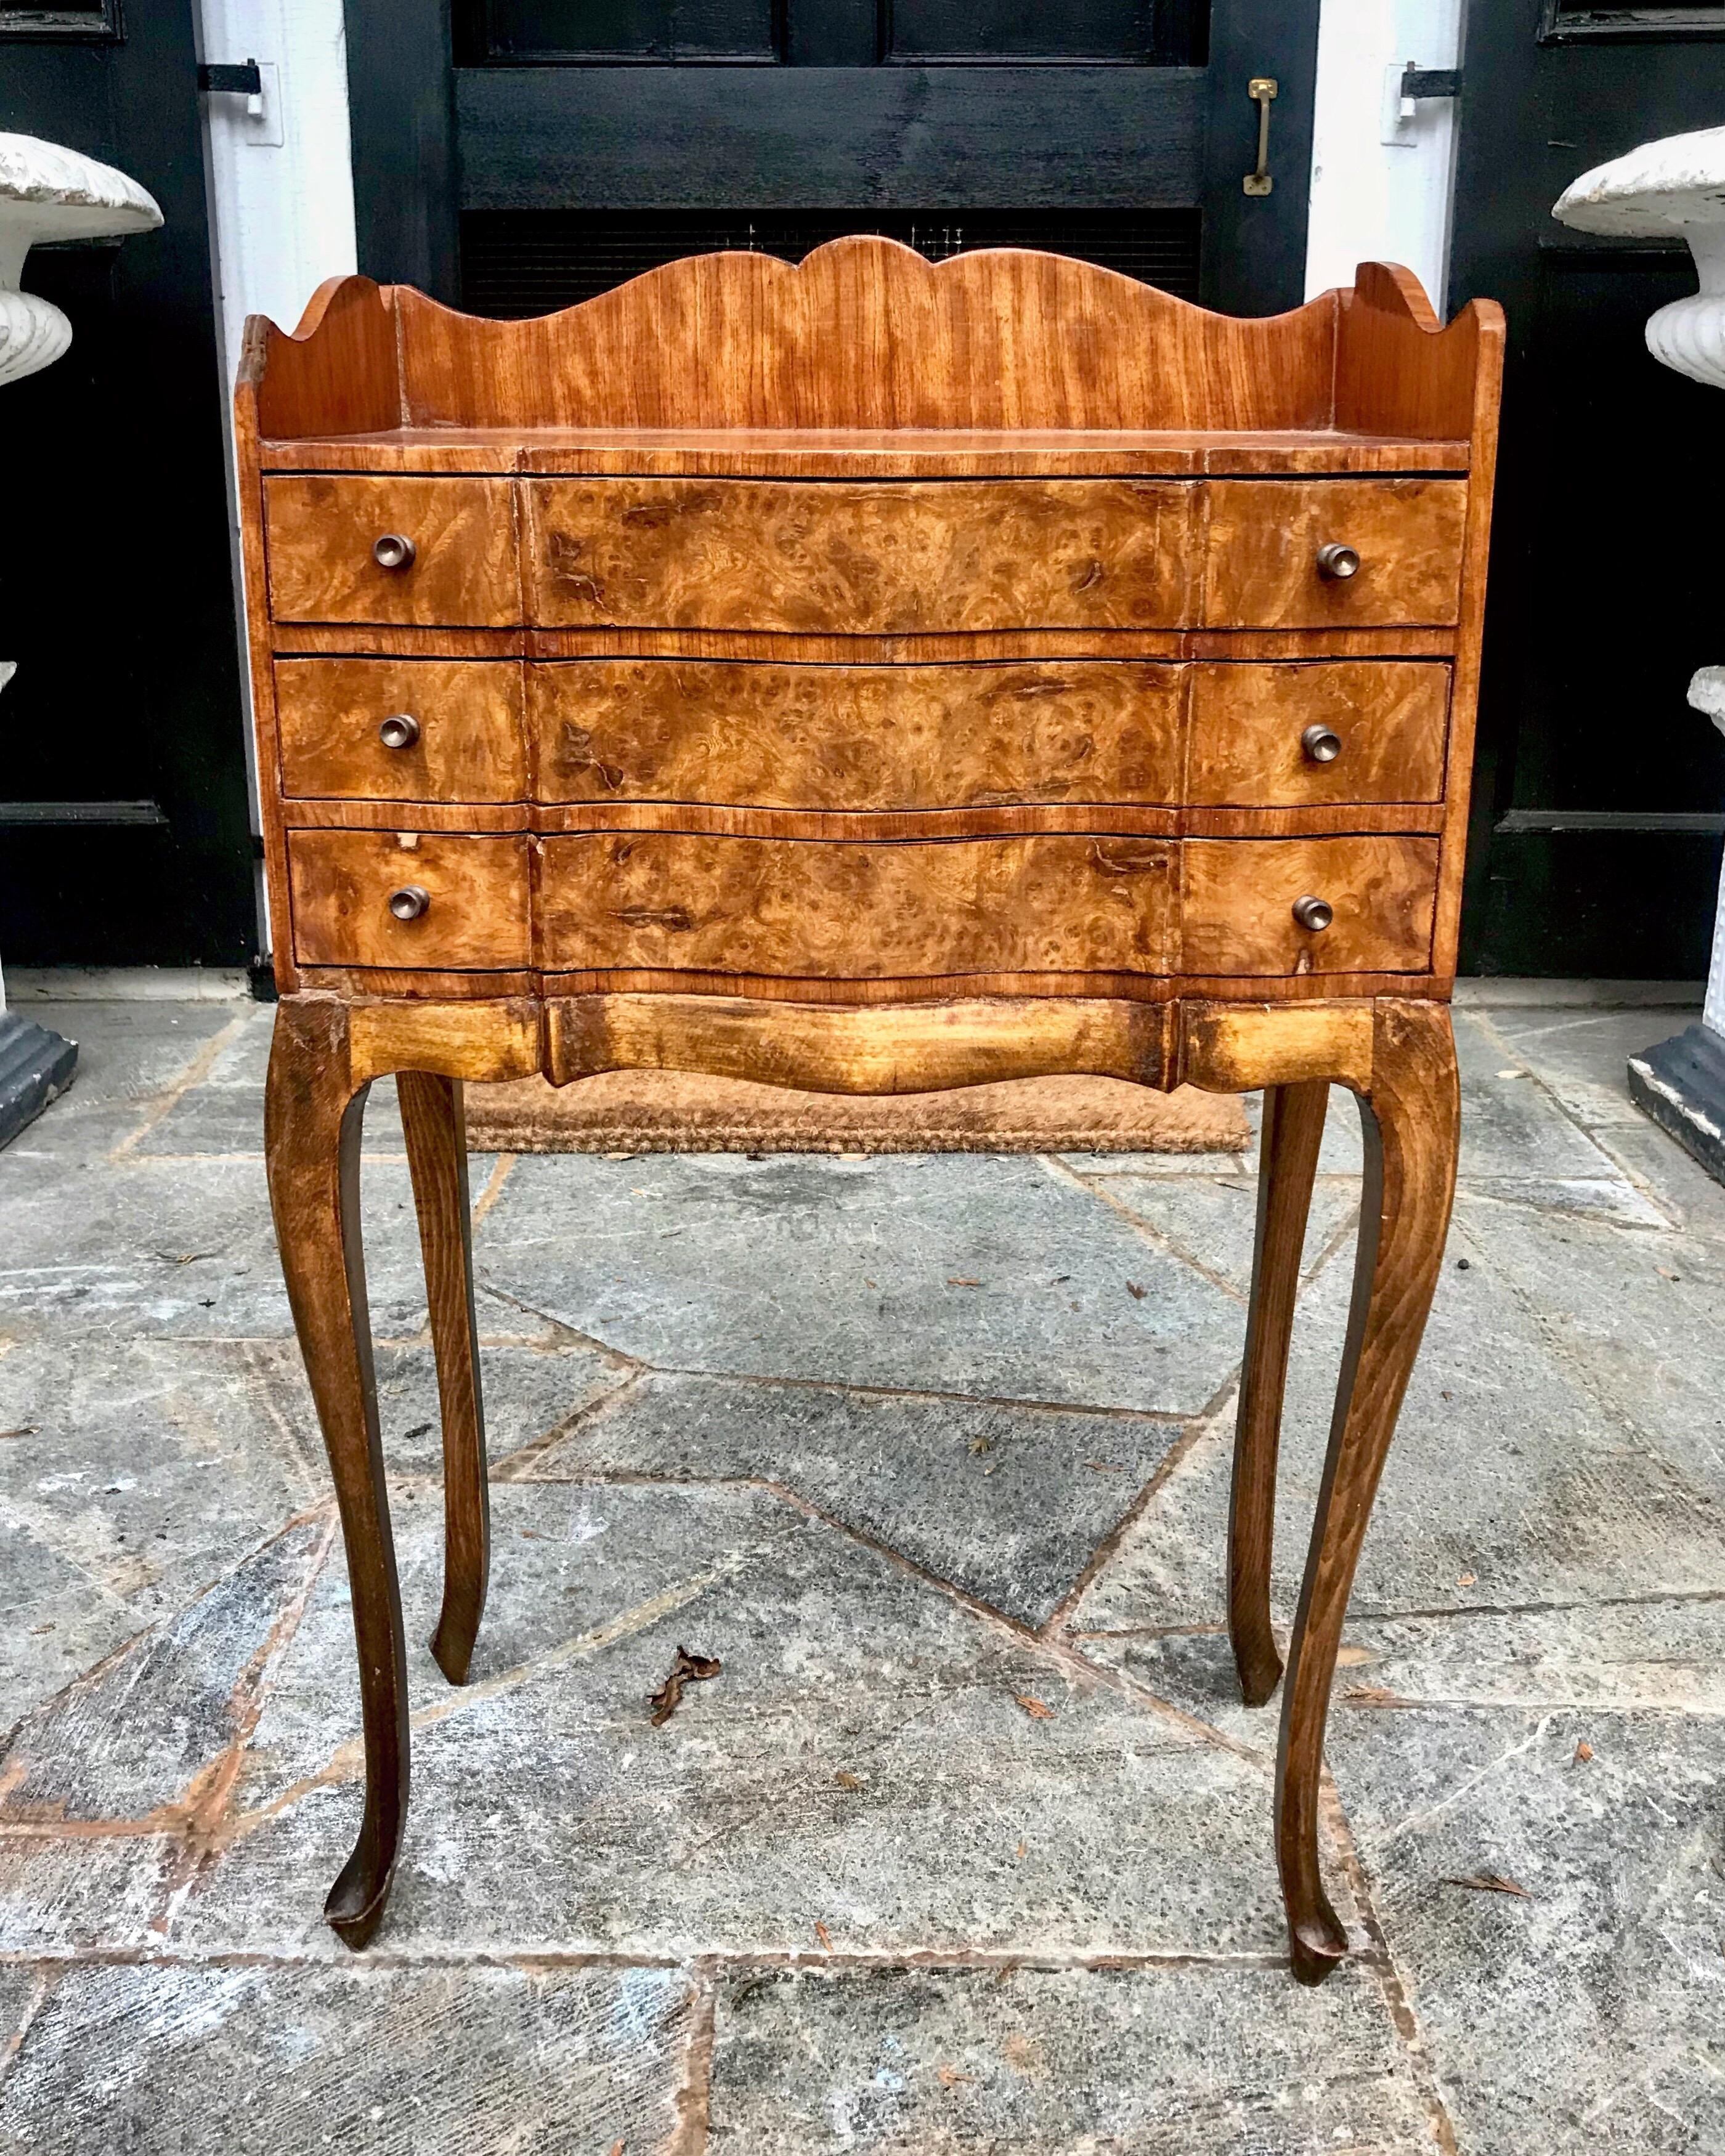 A good looking Louis XV style cabinet having three serpentine shaped thin drawers residing over dramatic and thin cabriole legs, circa 1955, the nightstand adds warmth and dramatic flare with the classic and rich look of burl wood veneer. Great